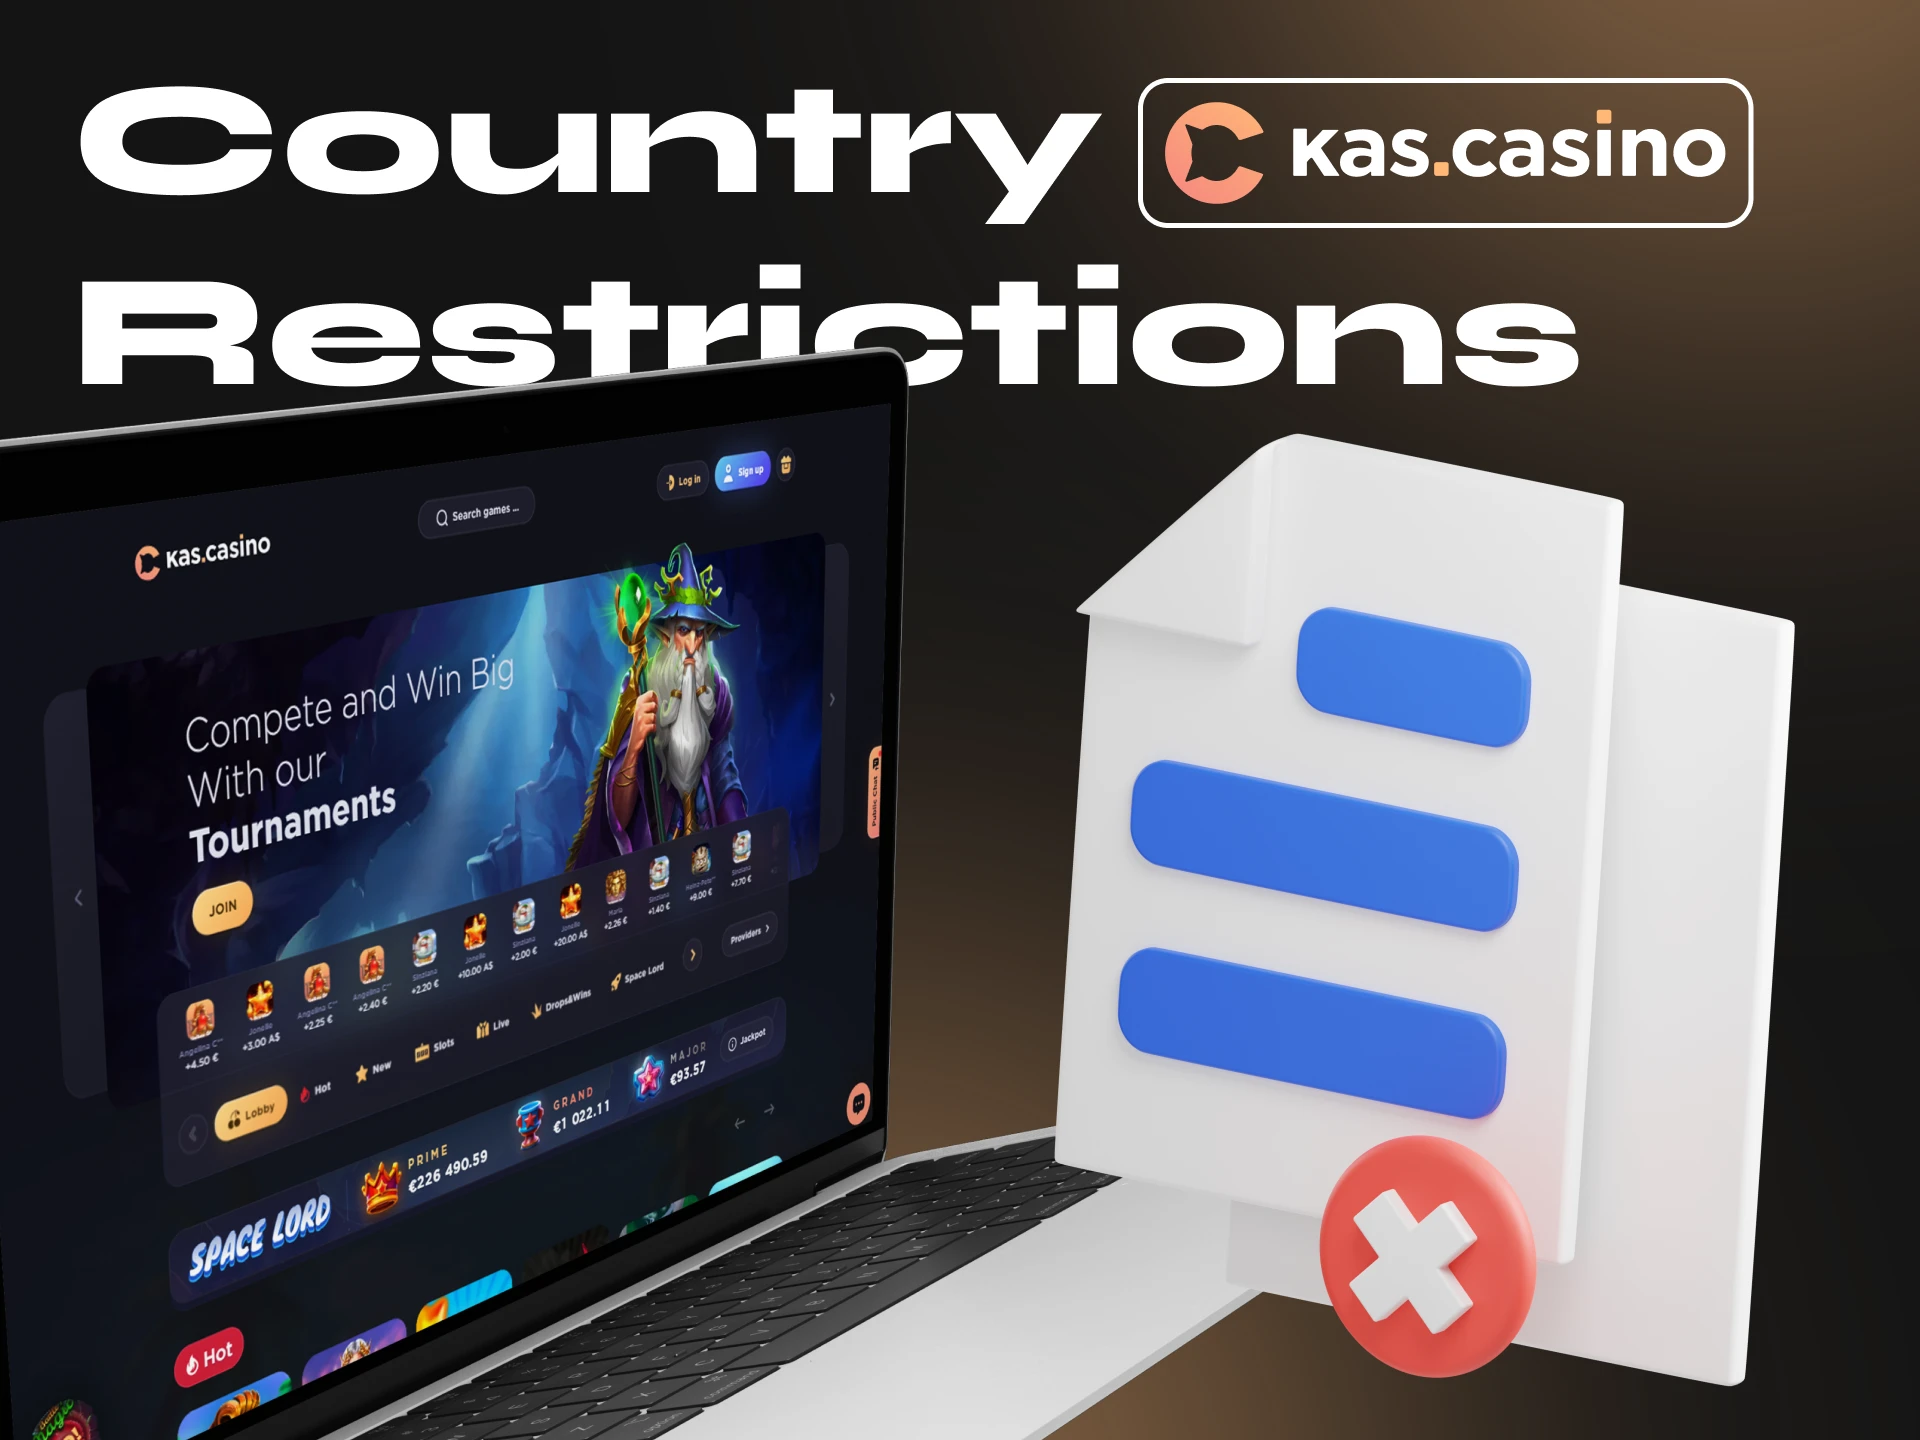 Kas Casino is prohibited in some countries, find out which ones.